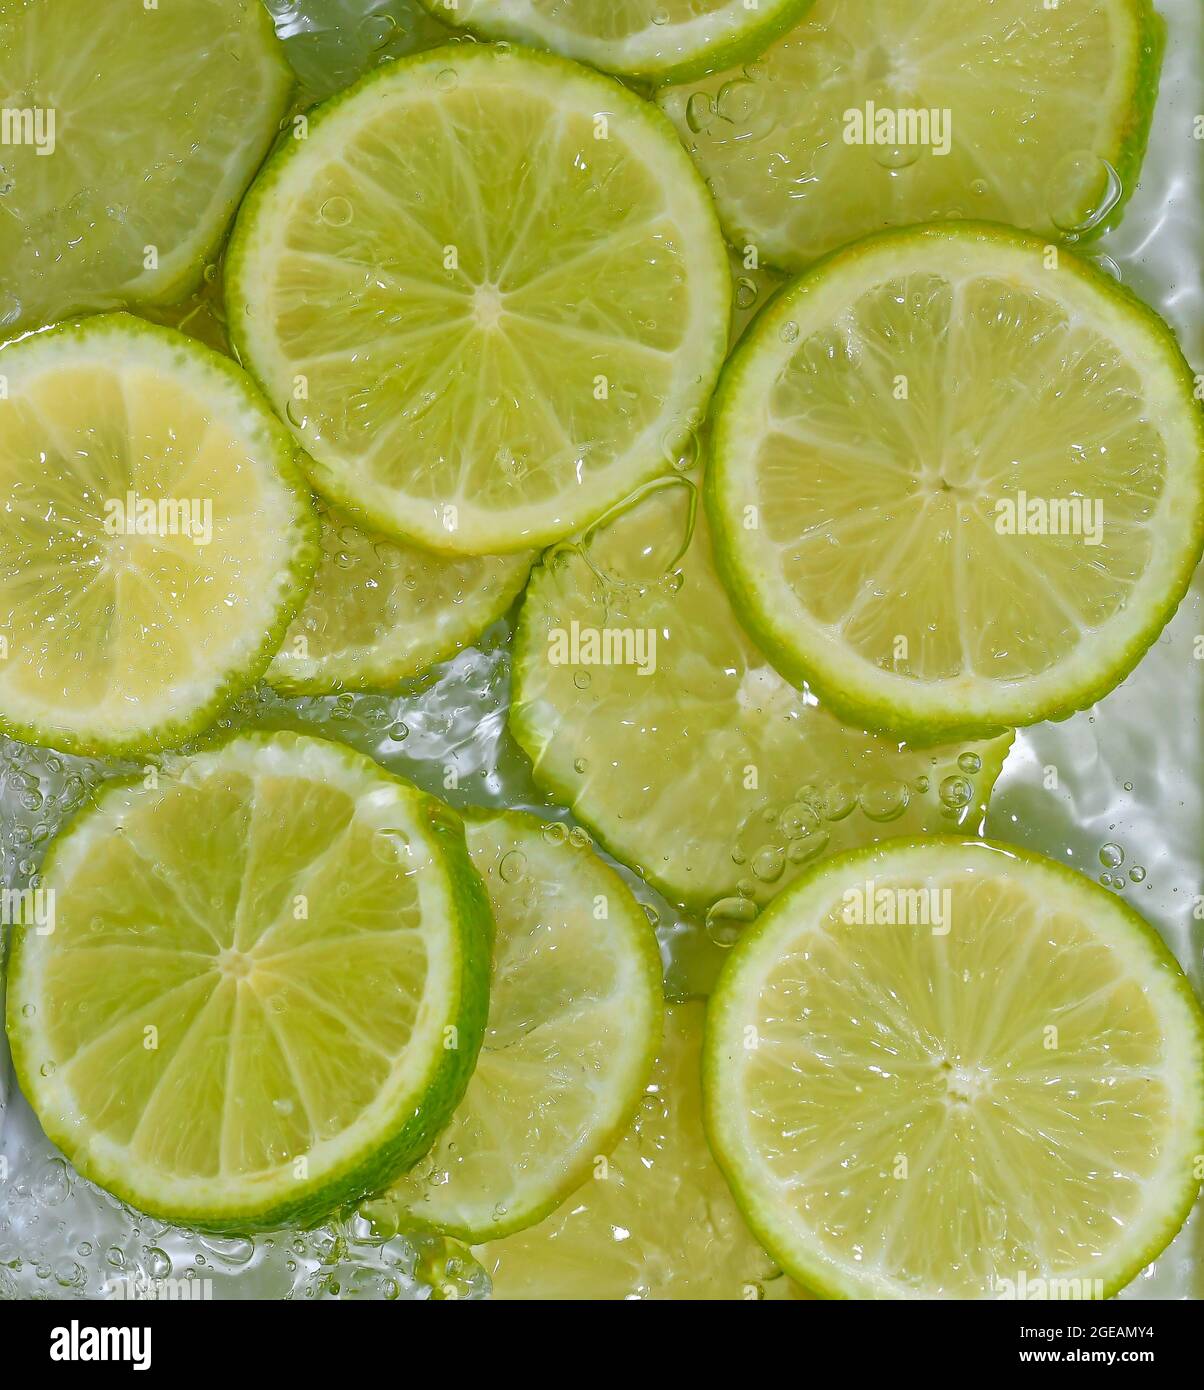 Close-up fresh slices of green limes on white background. Slices of limes in sparkling water on white background, closeup. Citrus soda Stock Photo